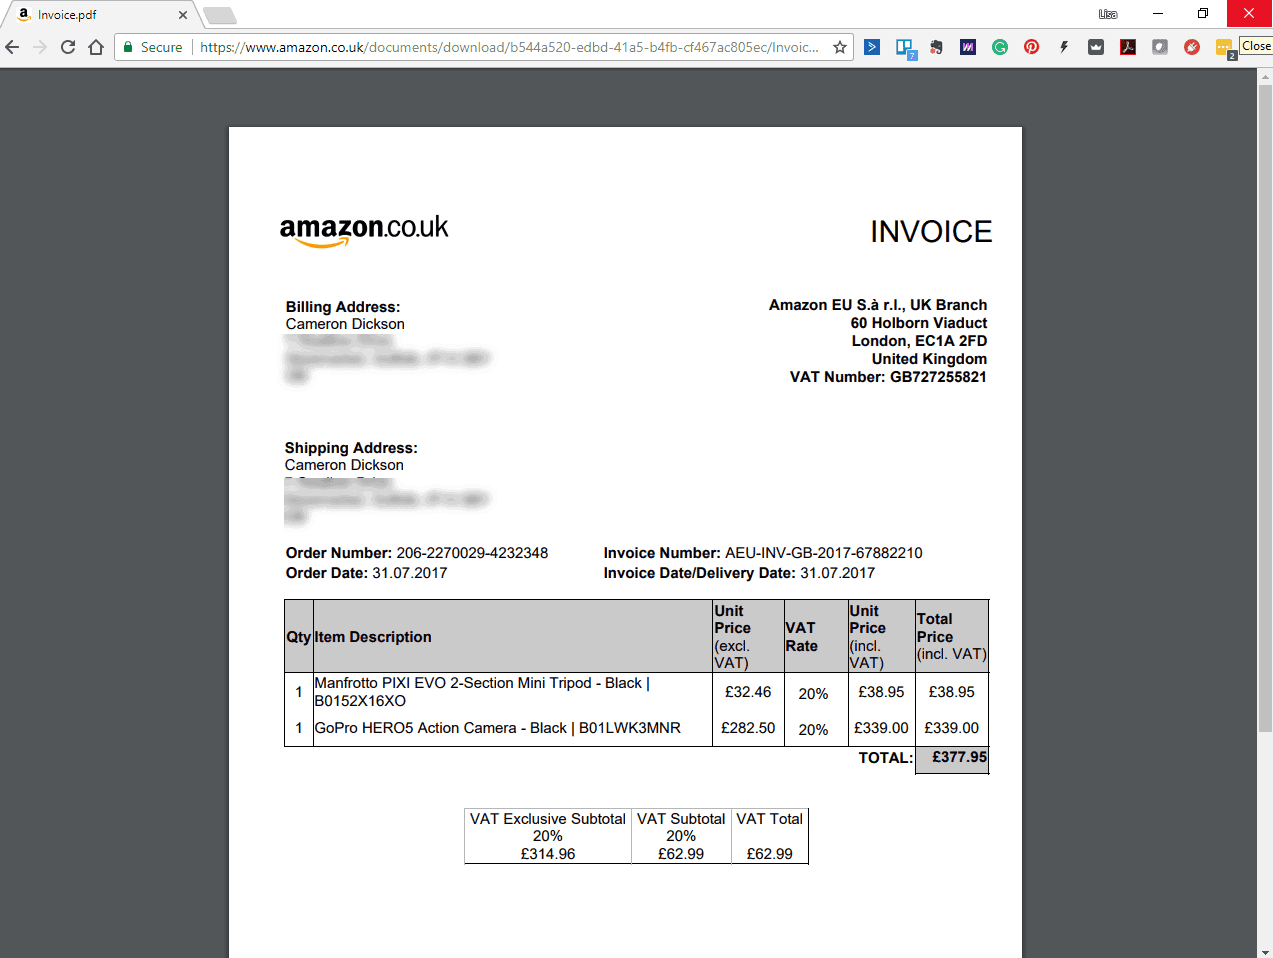 ups invoice number